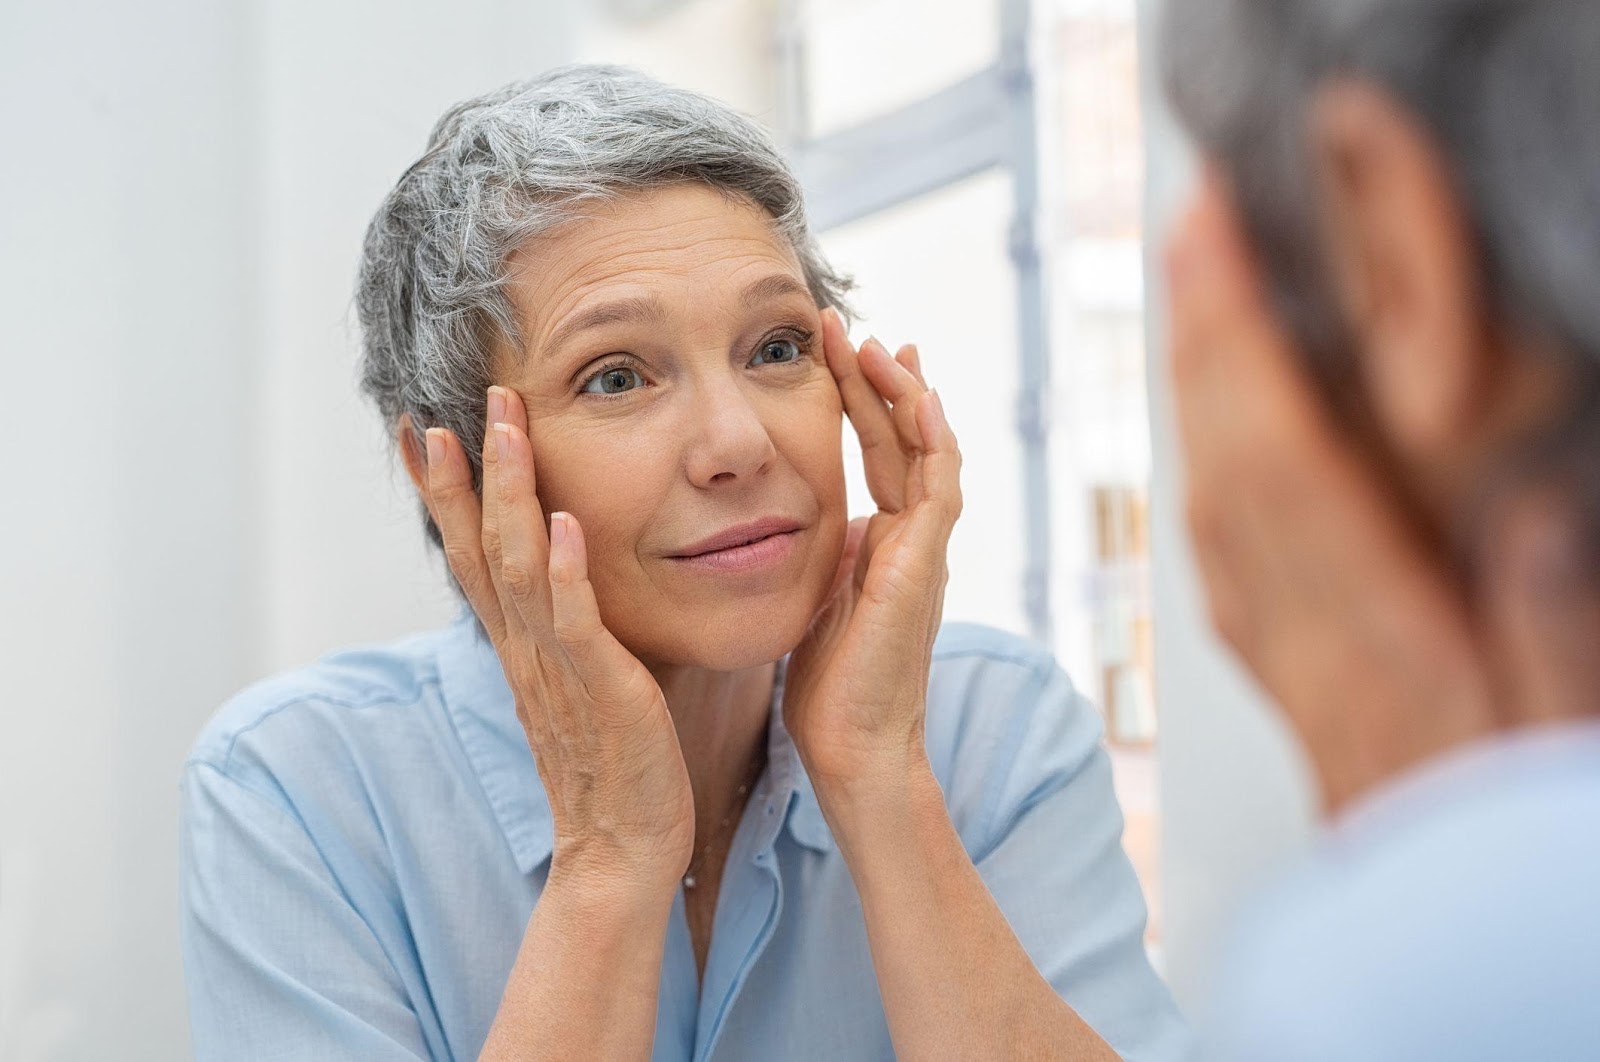 Skincare in your 50s: The best anti-aging products, regimen and advice